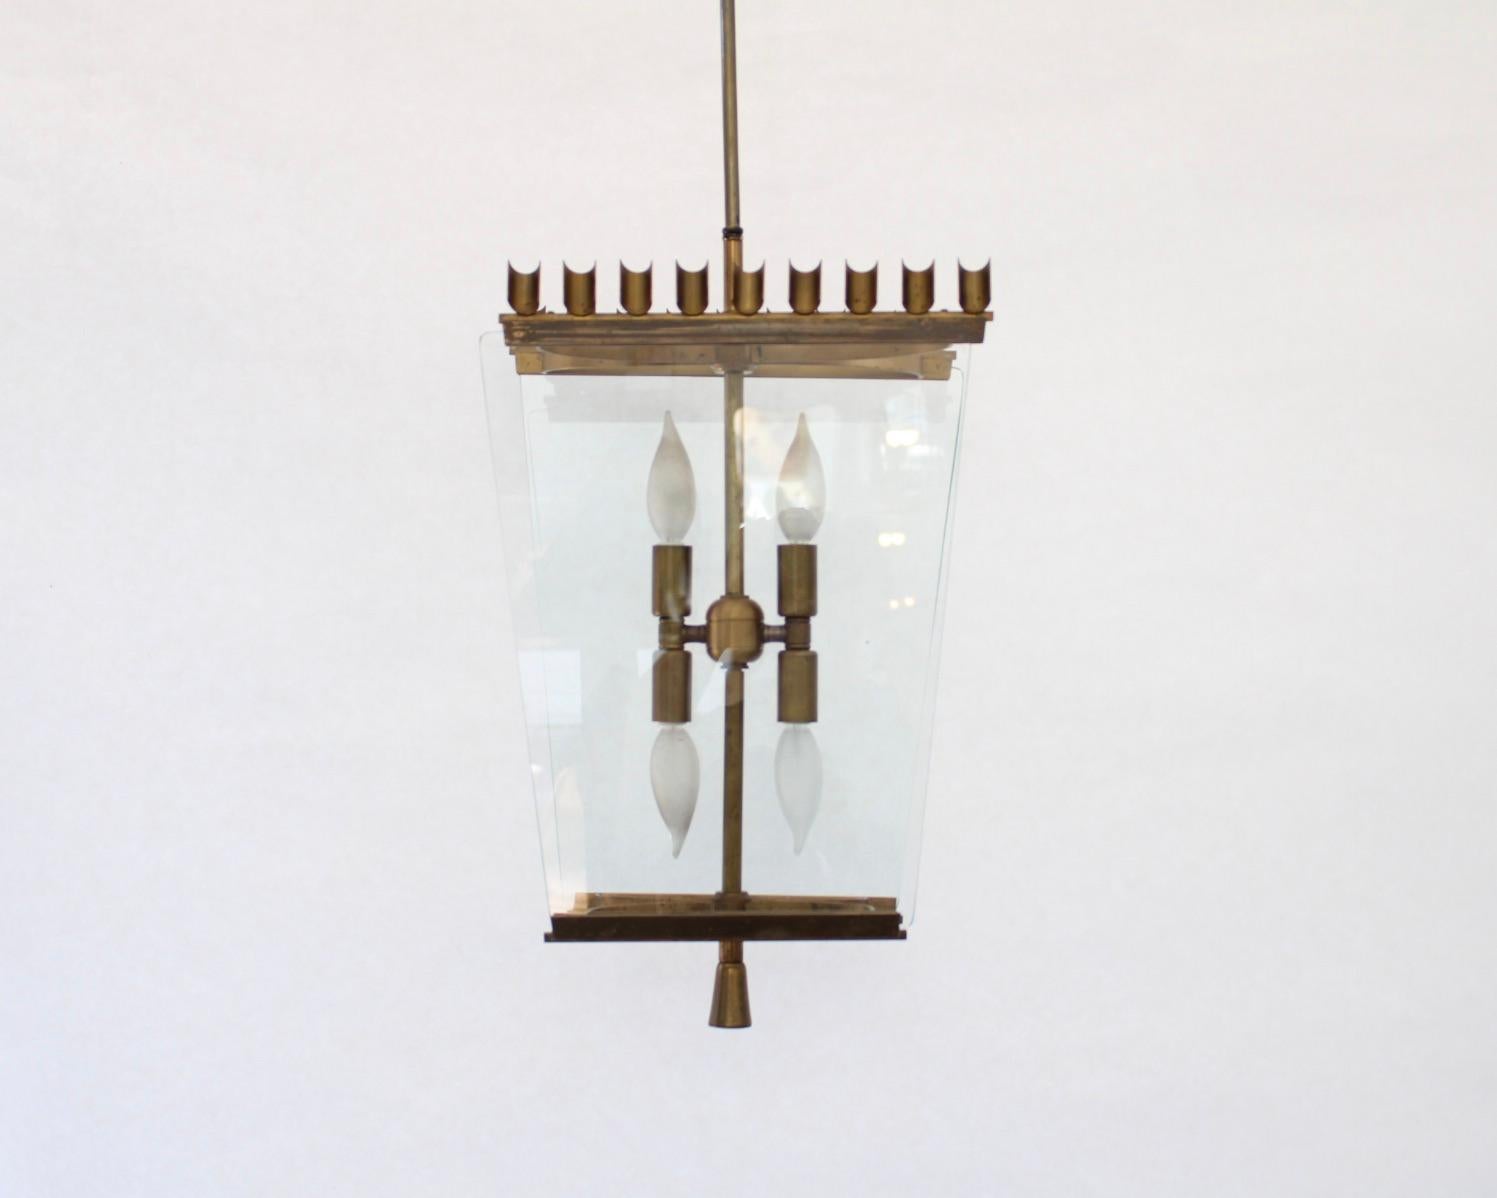 Italian decorative c 1940's pendant chandelier attributed to Fontana Arte. Decorative bronze frame with scalloped crown motif at the top and tapering glass panels. 
Glass is held in place at both top and bottom by a bronze frame. 
Terminating in a